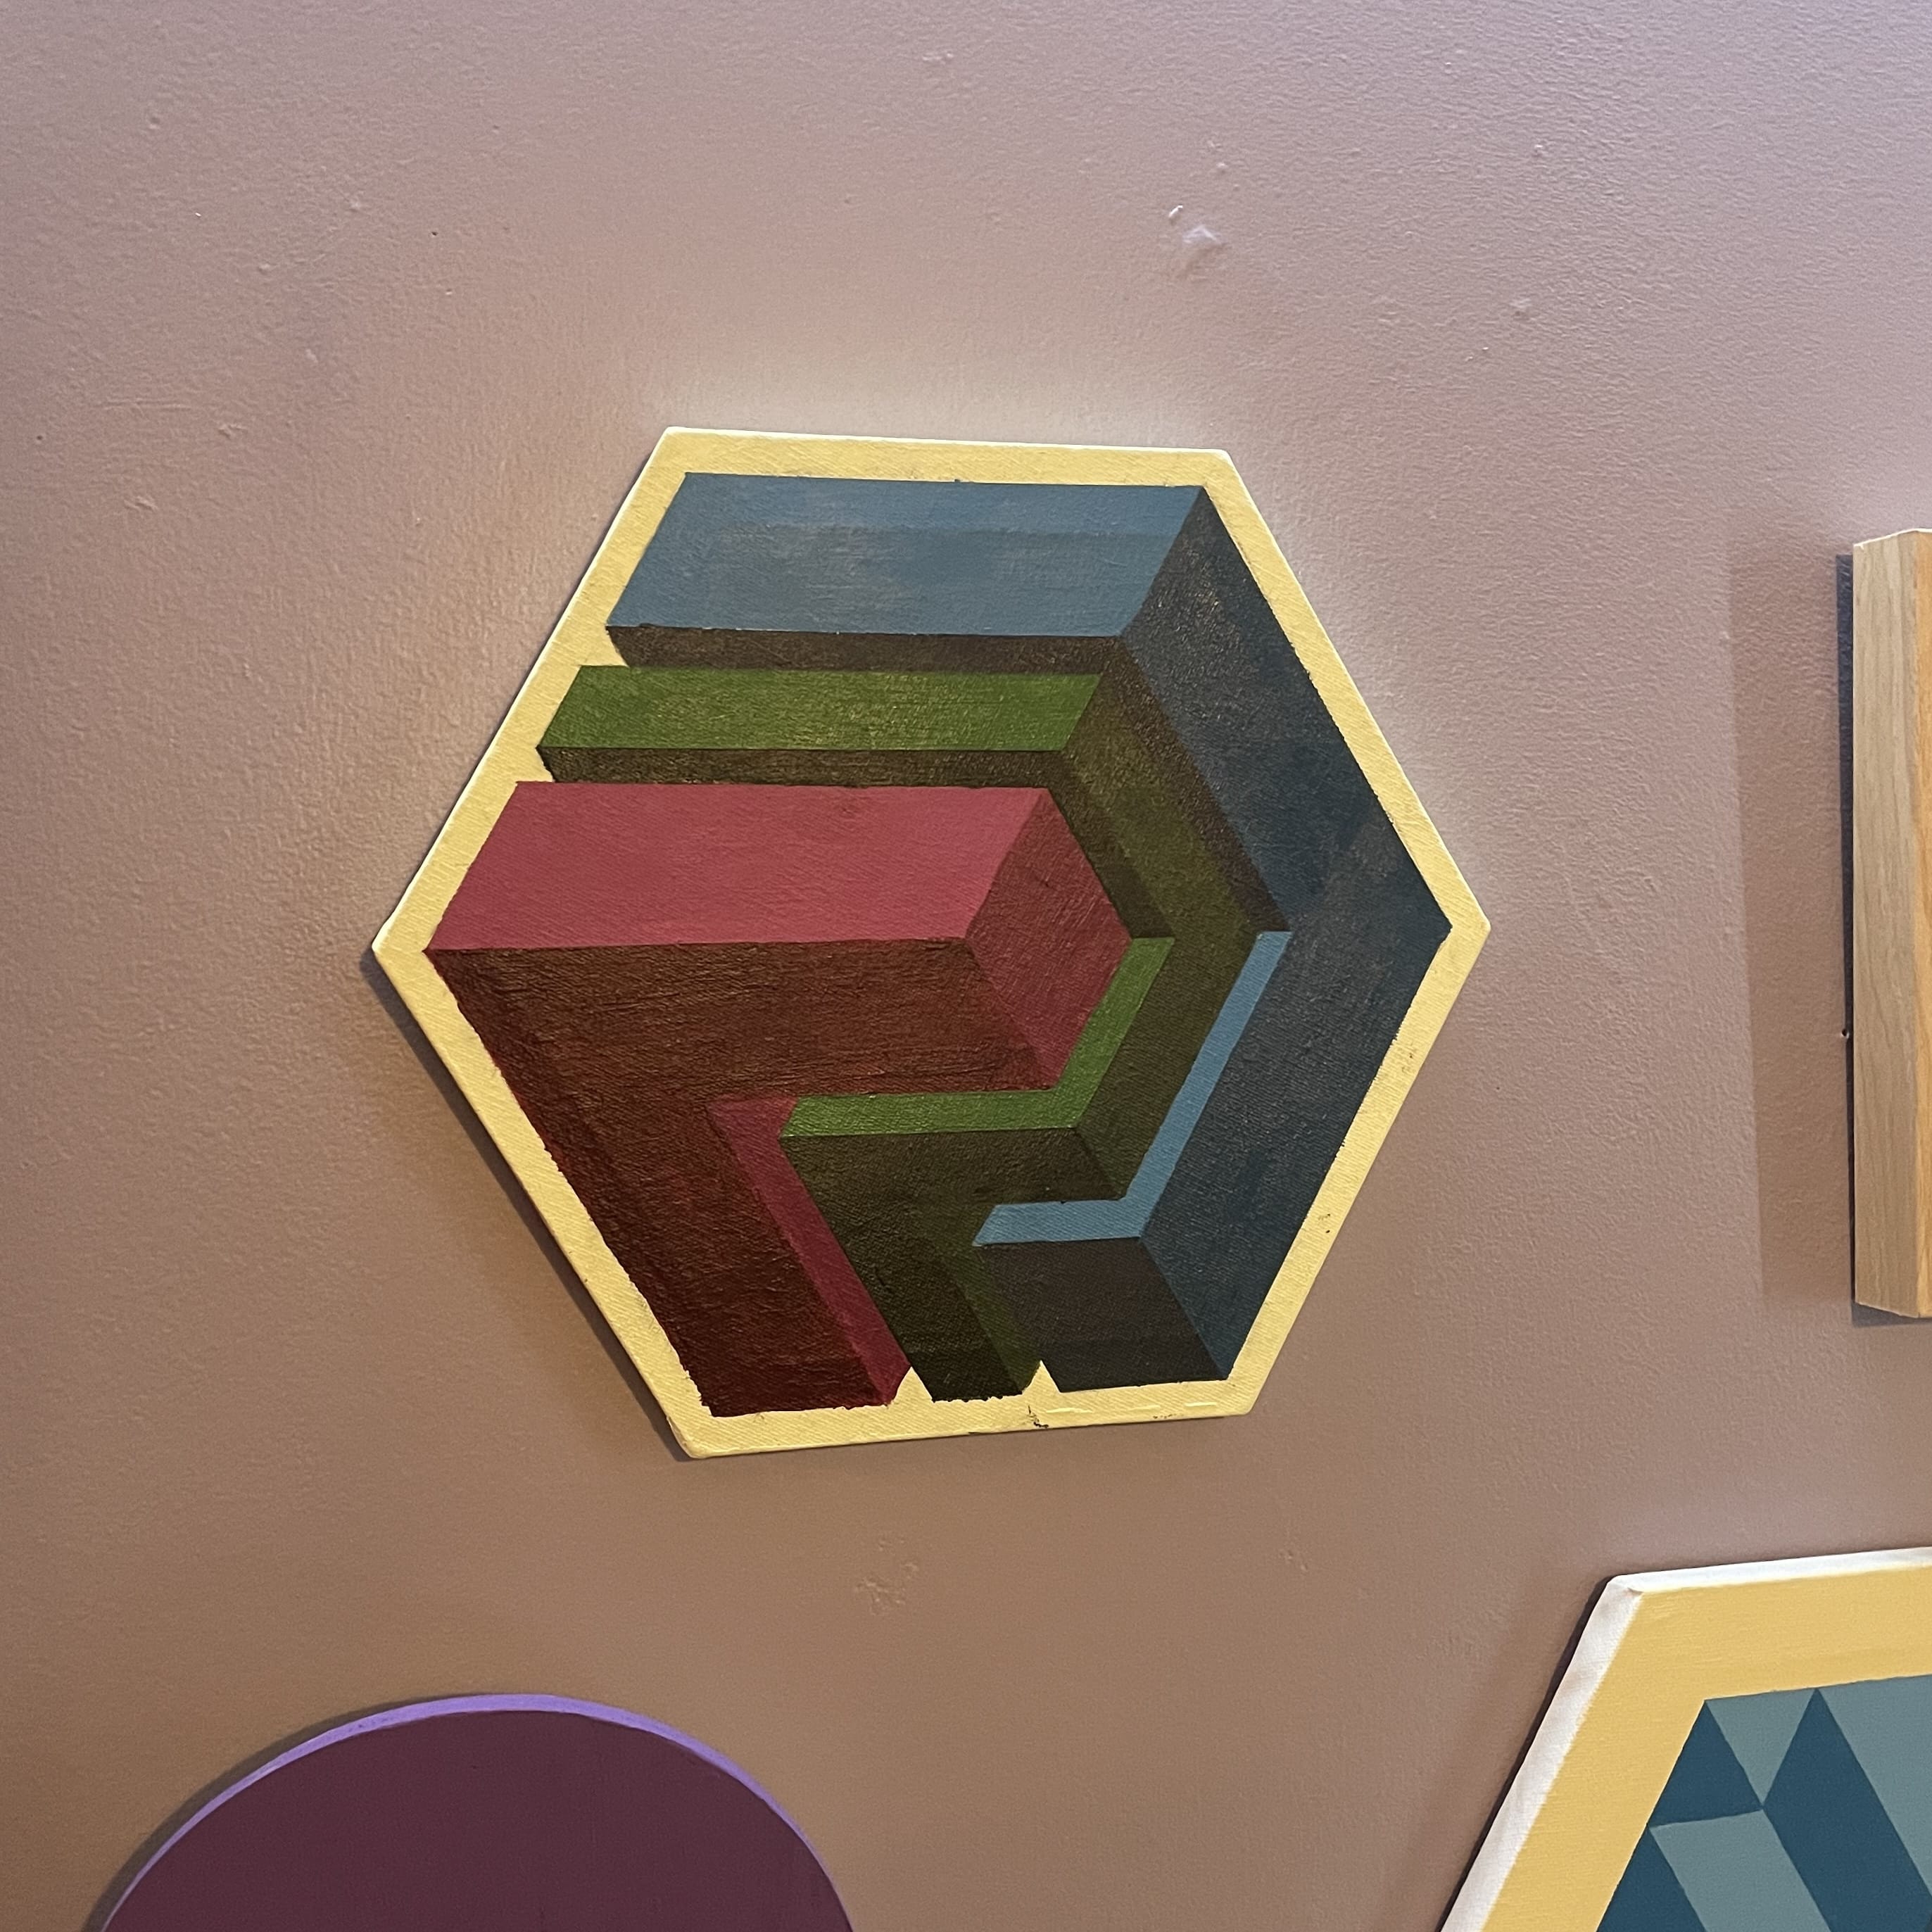 Colorful geometric shapes on a wall, including "L" shapes in blue, green and magenta.